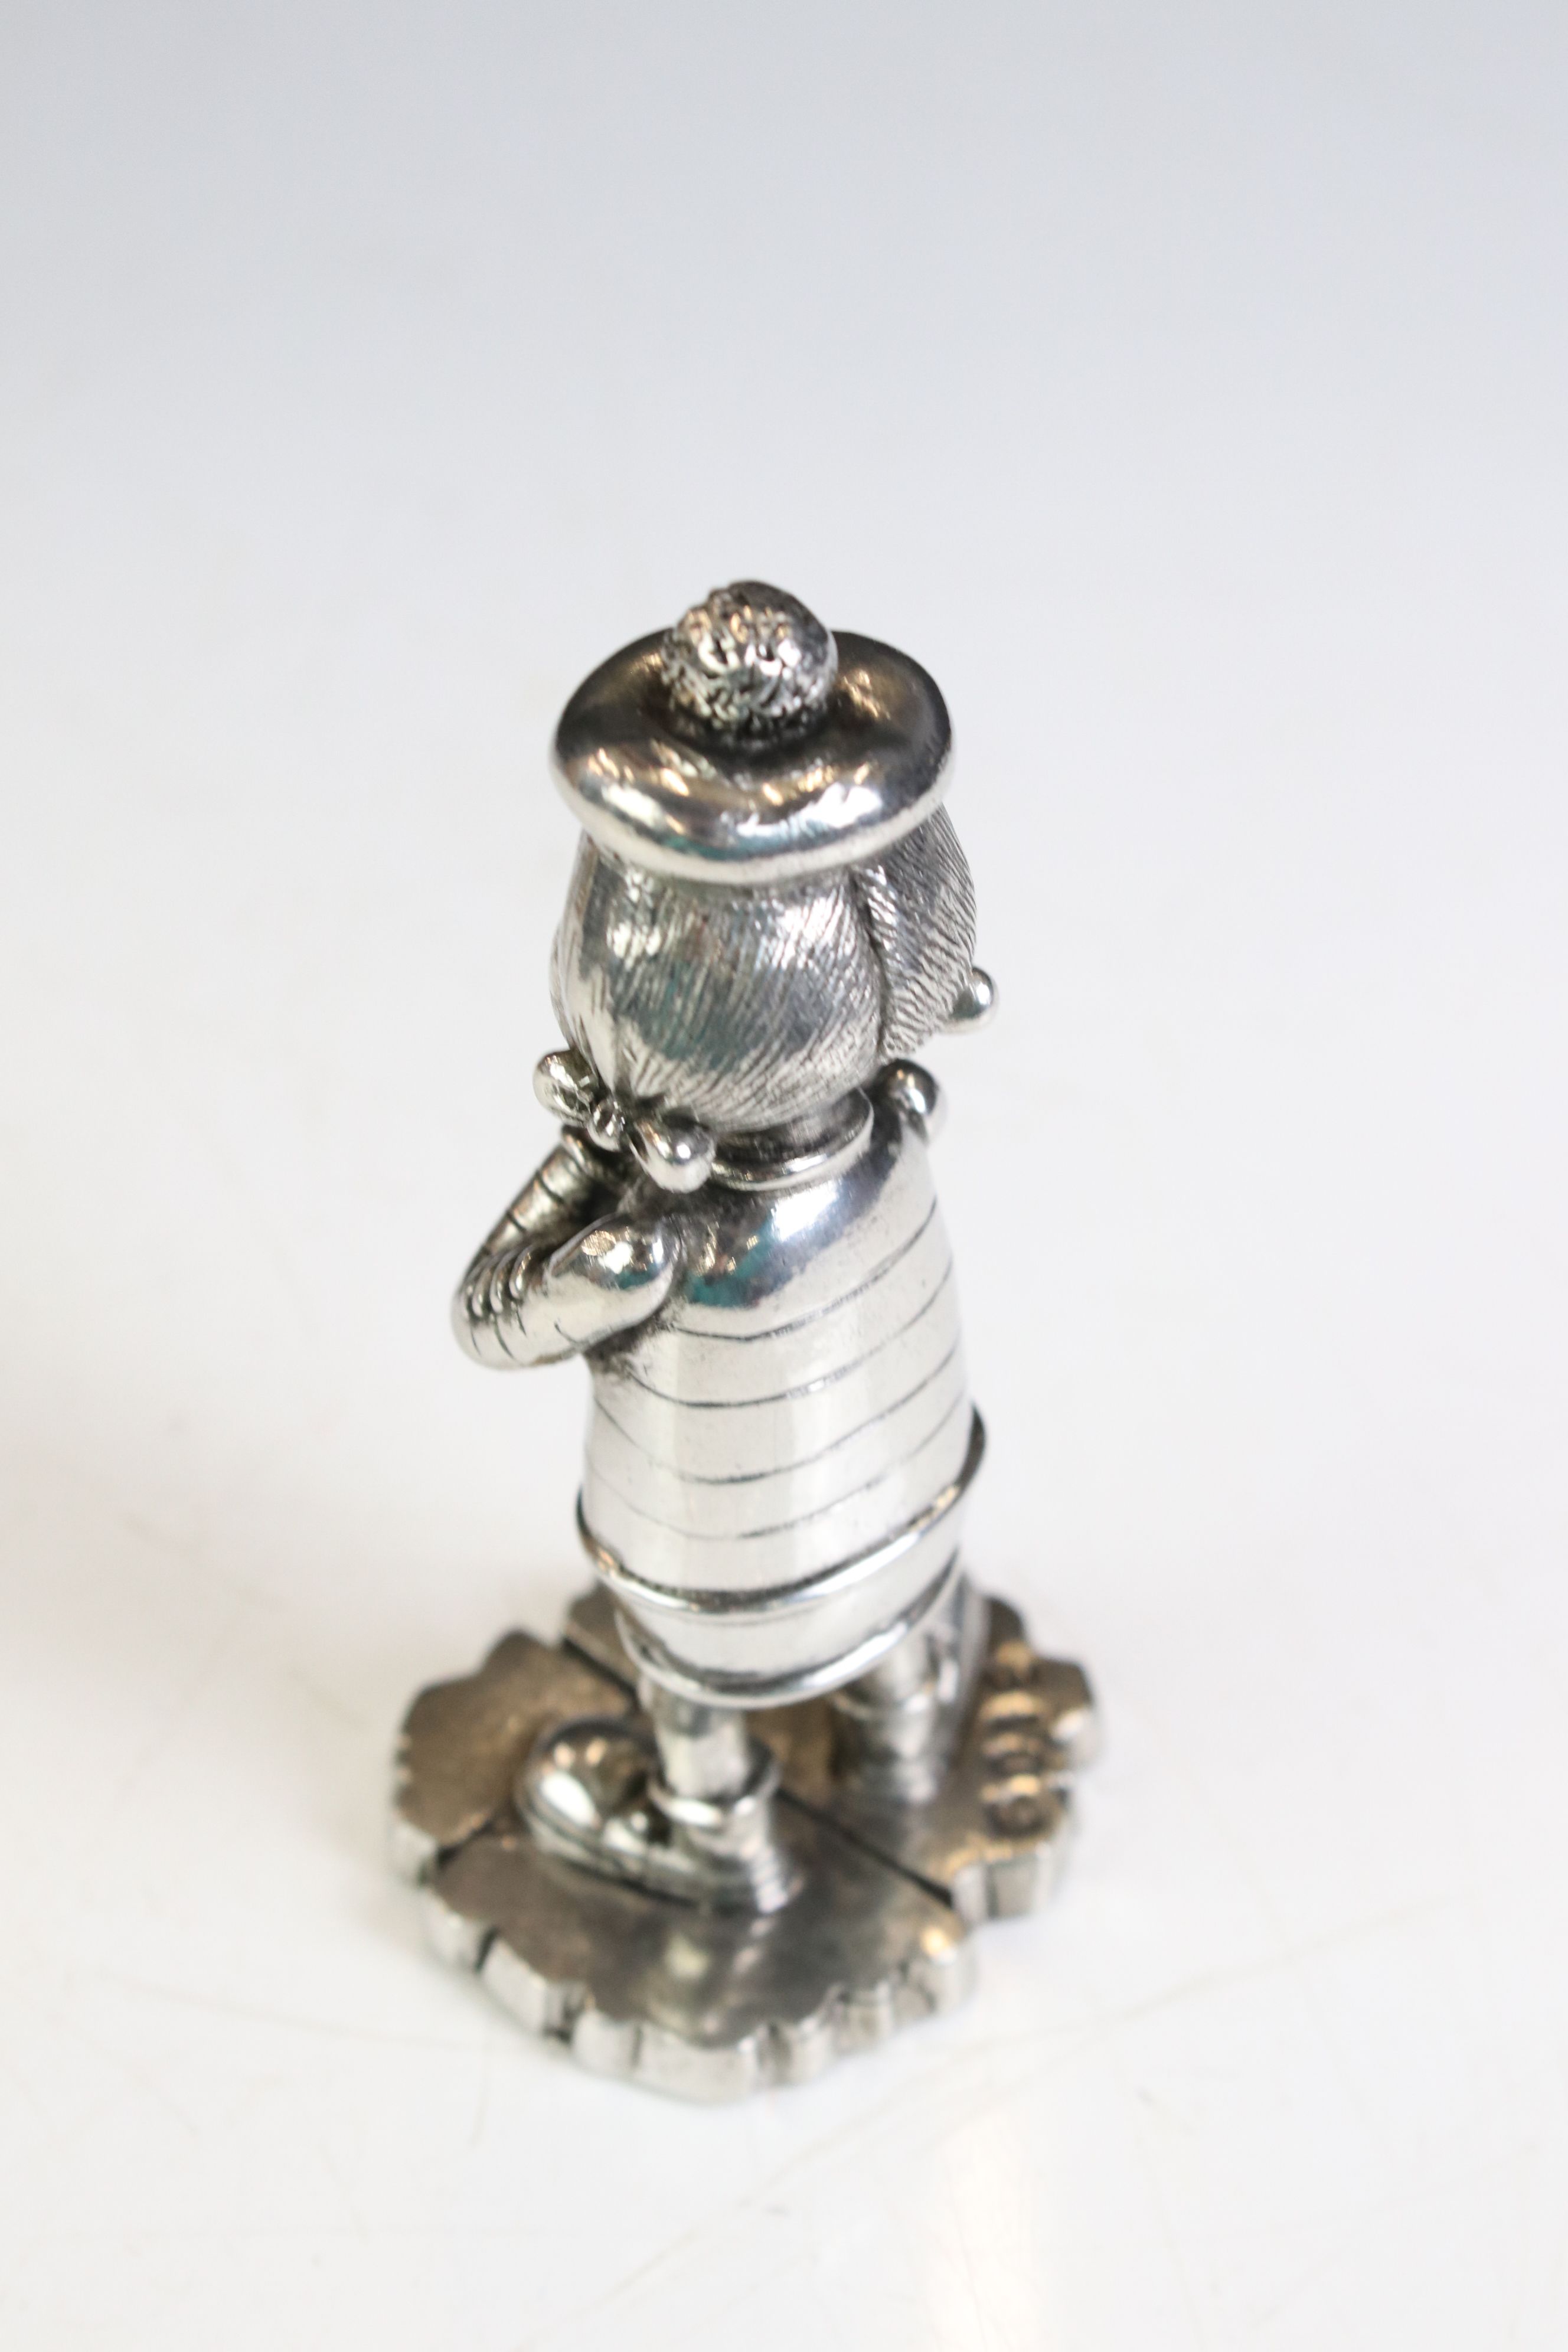 Robert Harrop Fine Pewter Collector's Pieces - Three boxed Limited Edition ' The Beano Dandy - Image 3 of 12